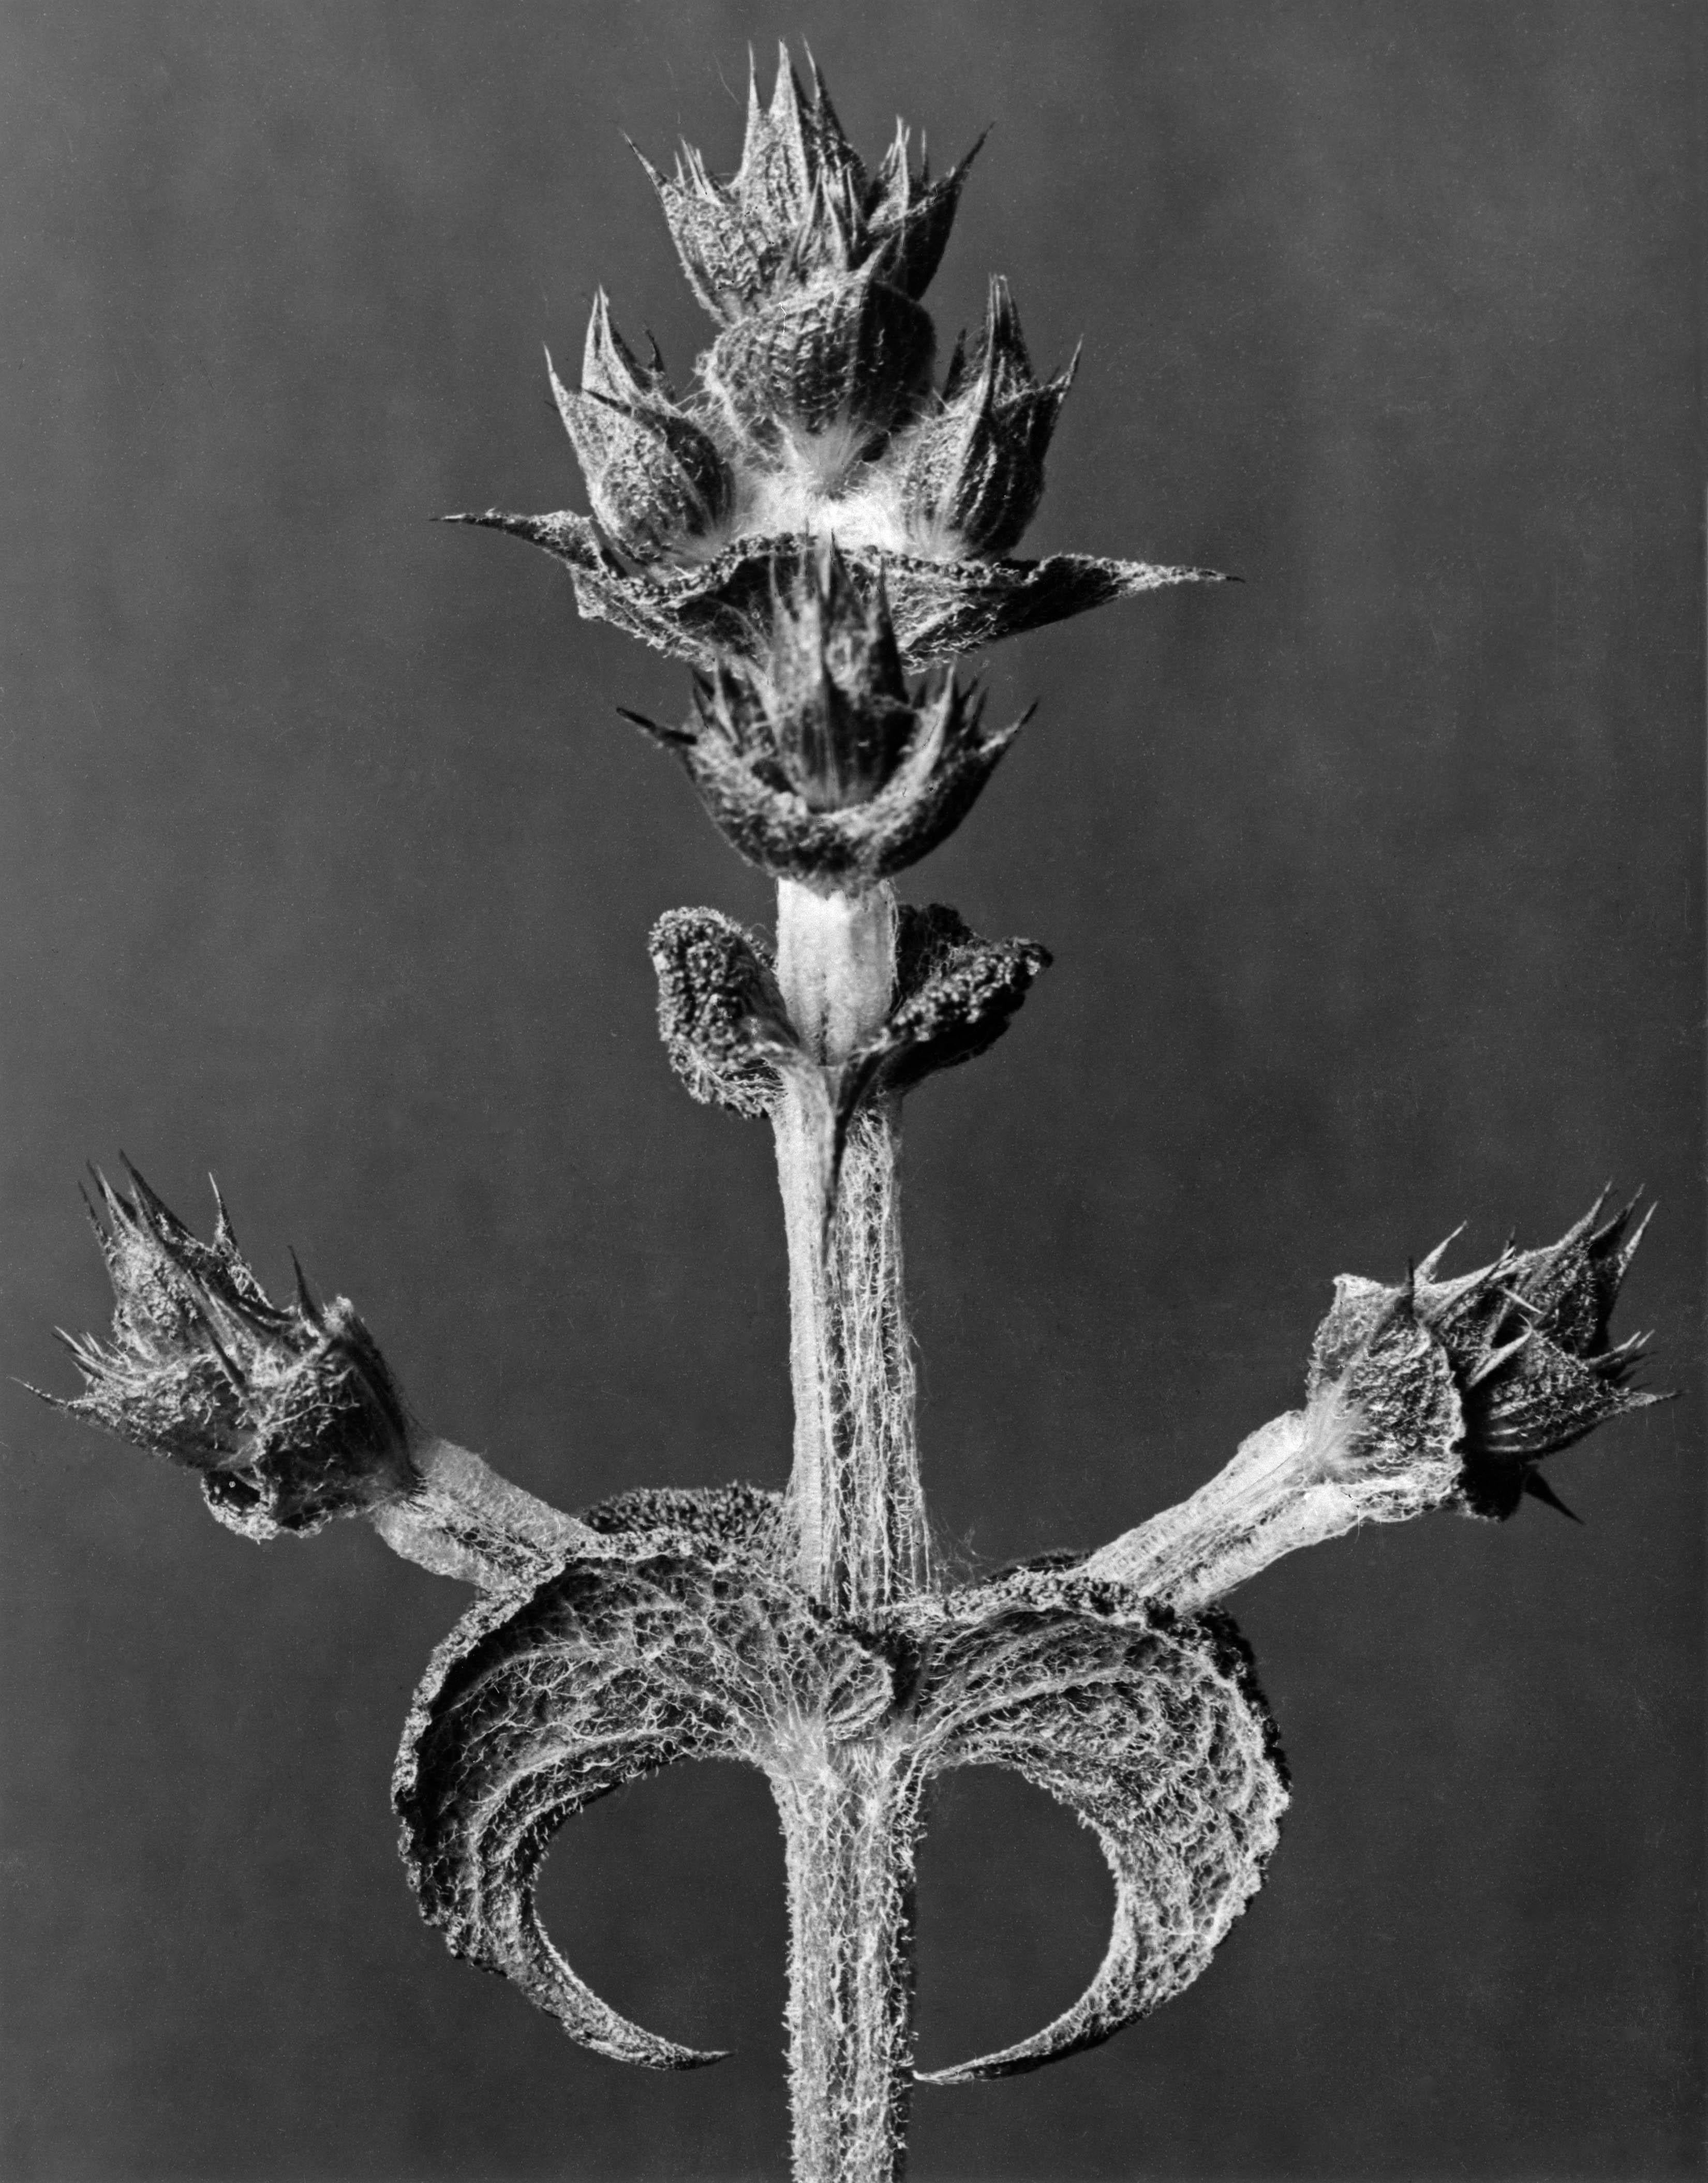 Karl Blossfeldt Black and White Photograph - Art Forms in Nature 18